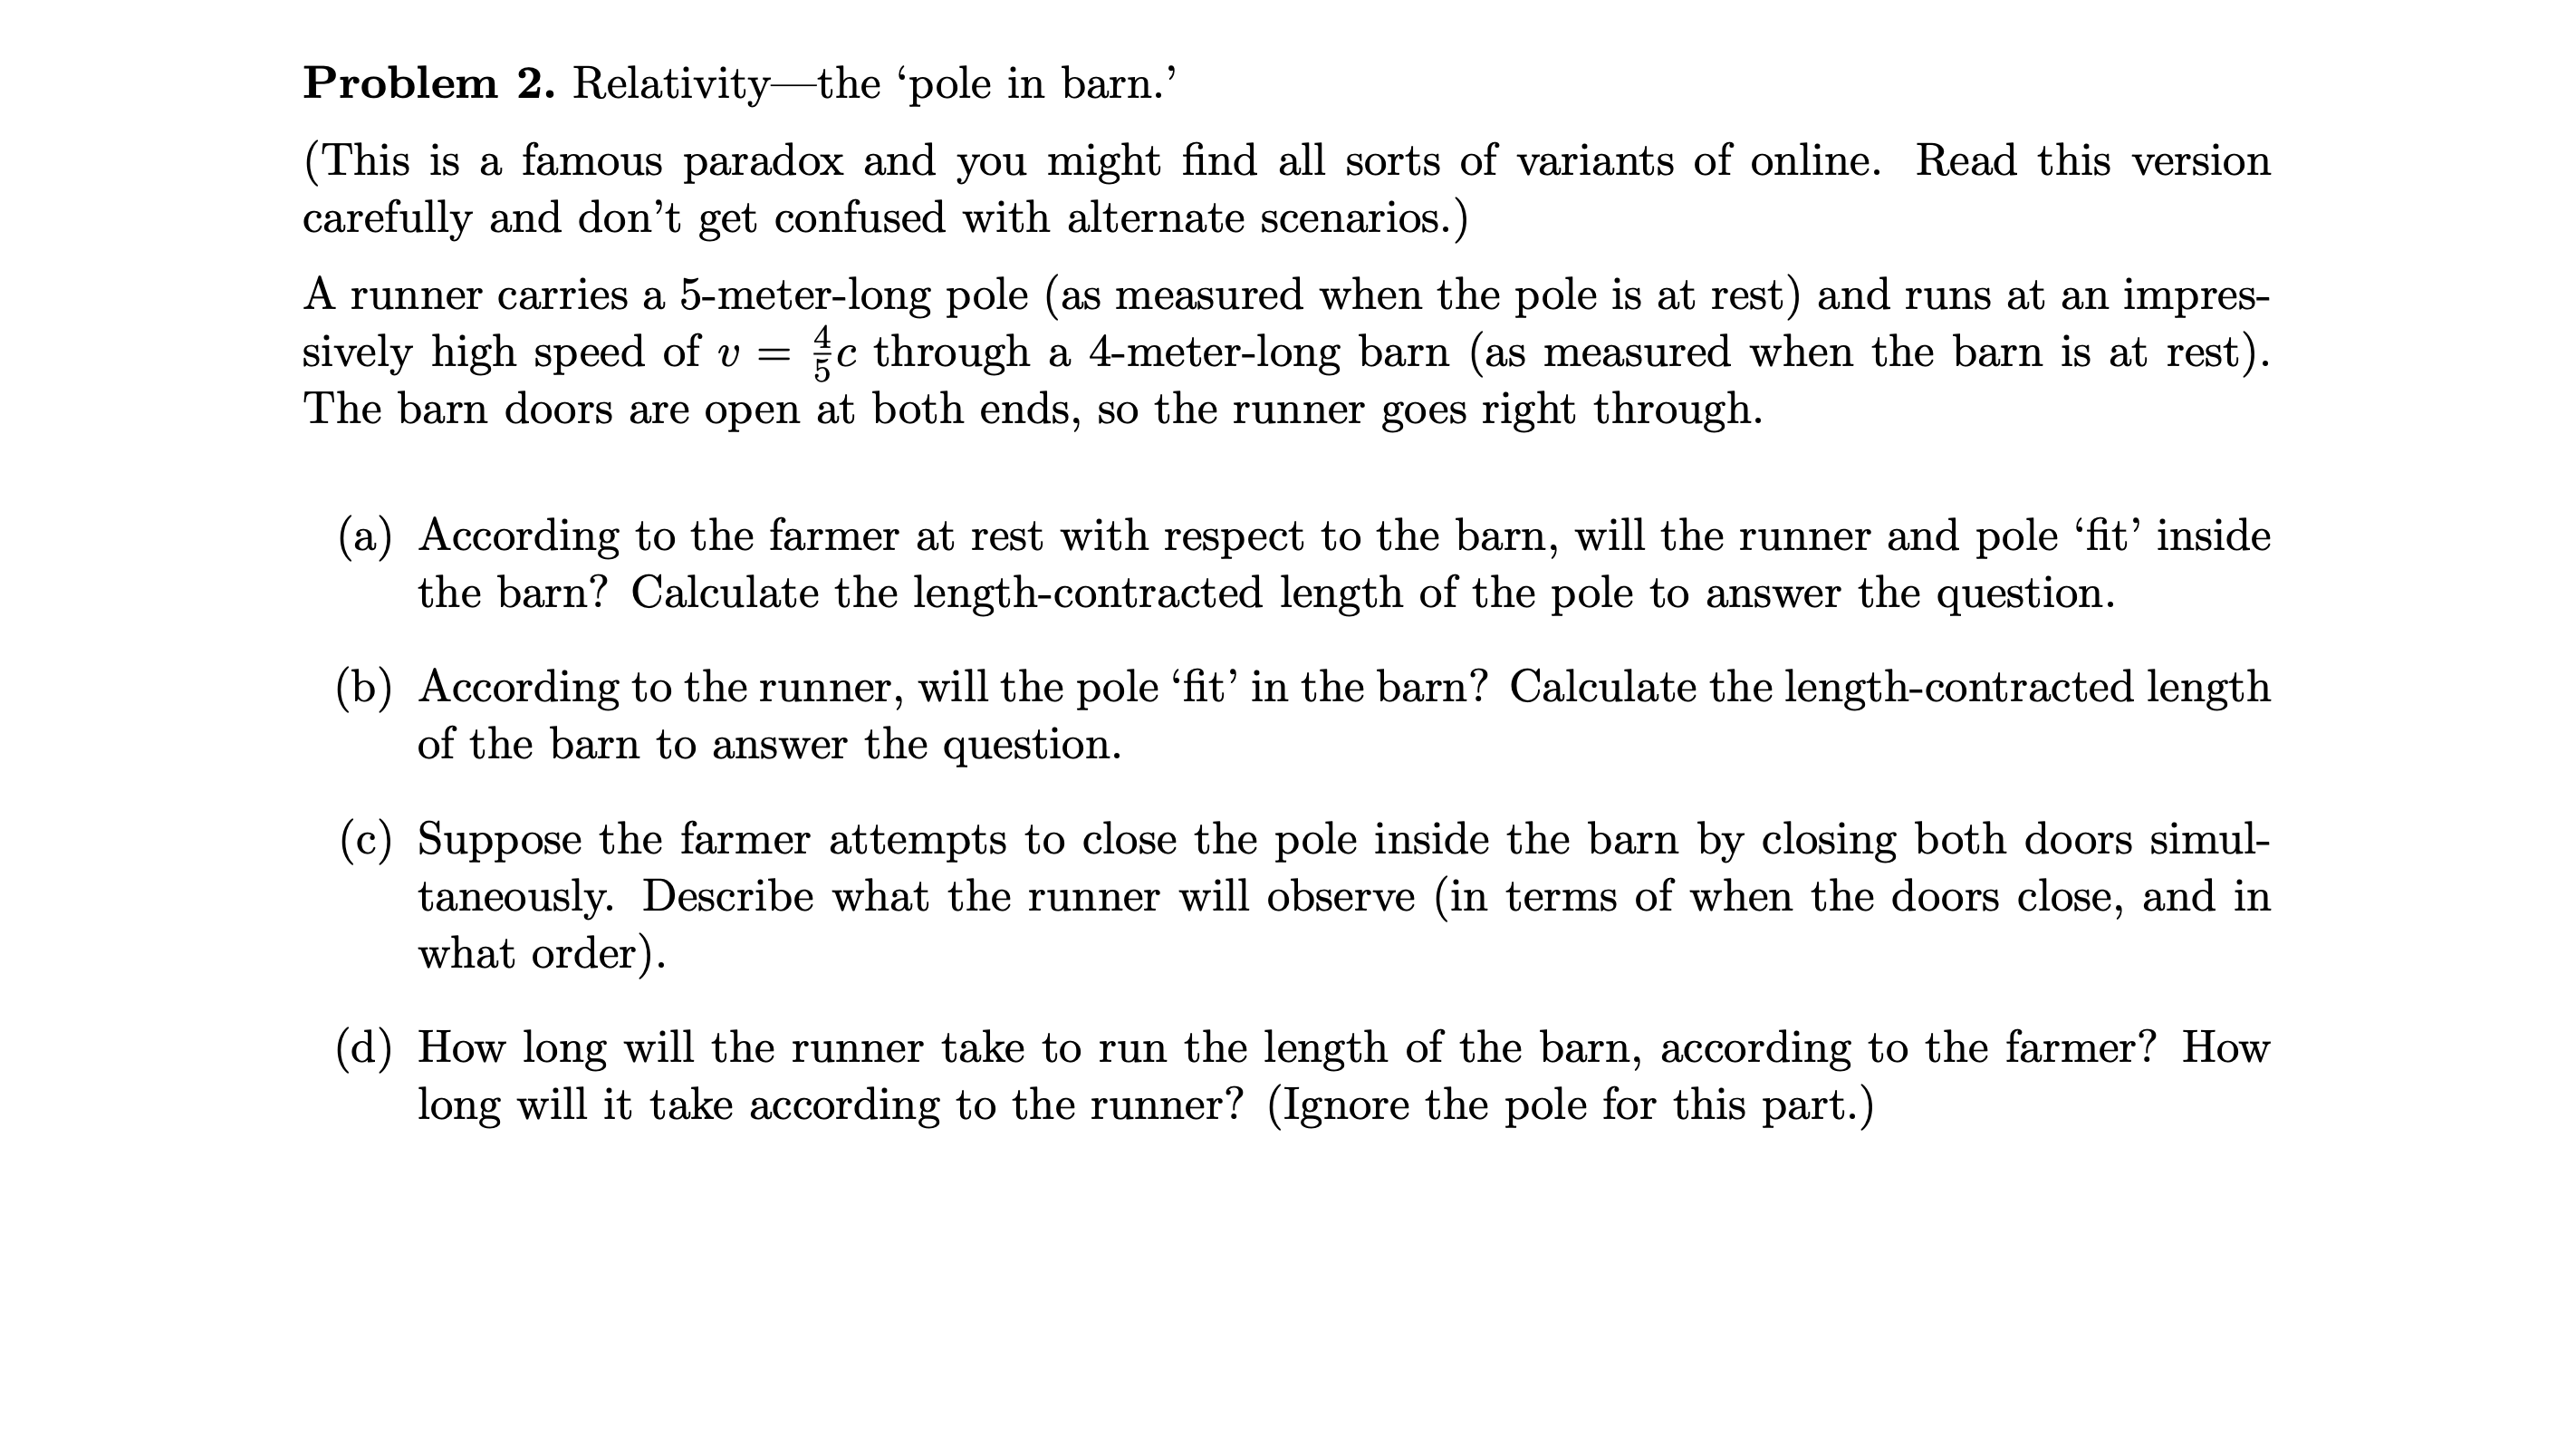 Problem 2. Relativity-the 'pole in barn.'
(This is a famous paradox and you might find all sorts of variants of online. Read this version
carefully and don't get confused with alternate scenarios.)
A runner carries a 5-meter-long pole (as mcasured when the pole is at rest) and runs at an impres-
sively high speed of v =
The barn doors are open at both ends, so the runner gocs right through.
= c through a 4-meter-long barn (as measured when the barn is at rest).
(a) According to the farmer at rest with respect to the barn, will the runner and pole 'fit' inside
the barn? Calculate the length-contracted length of the pole to answer the question.
(b) According to the runner, will the pole 'fit in the barn? Calculate the length-contracted length
of the barn to answer the question.
